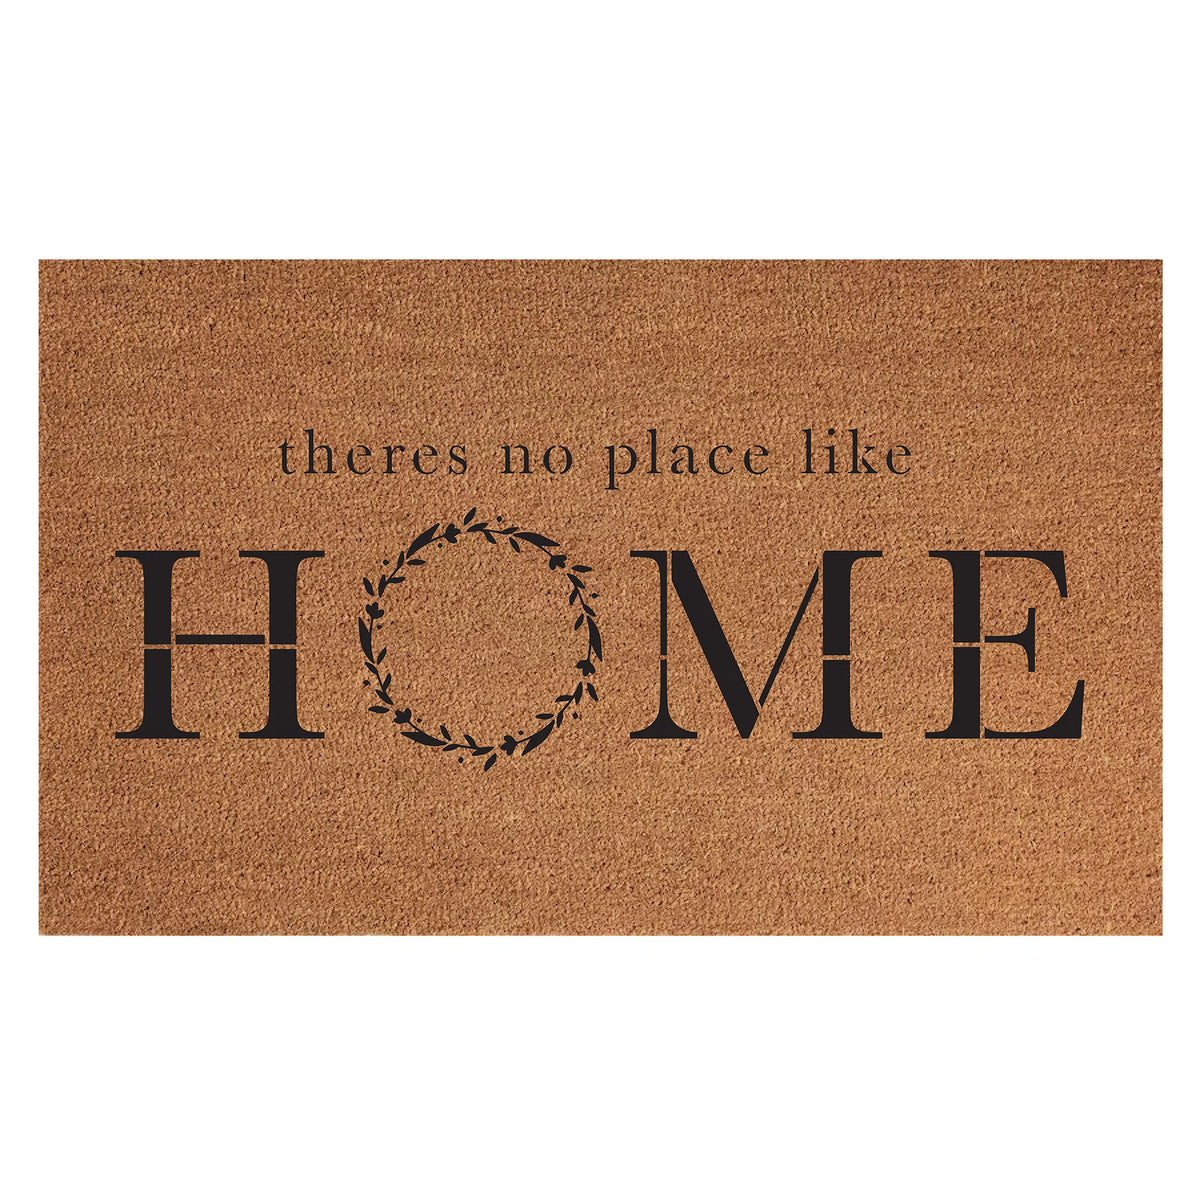 There's No Place Like Home / 18x30 Indoor/Outdoor Coir Mat